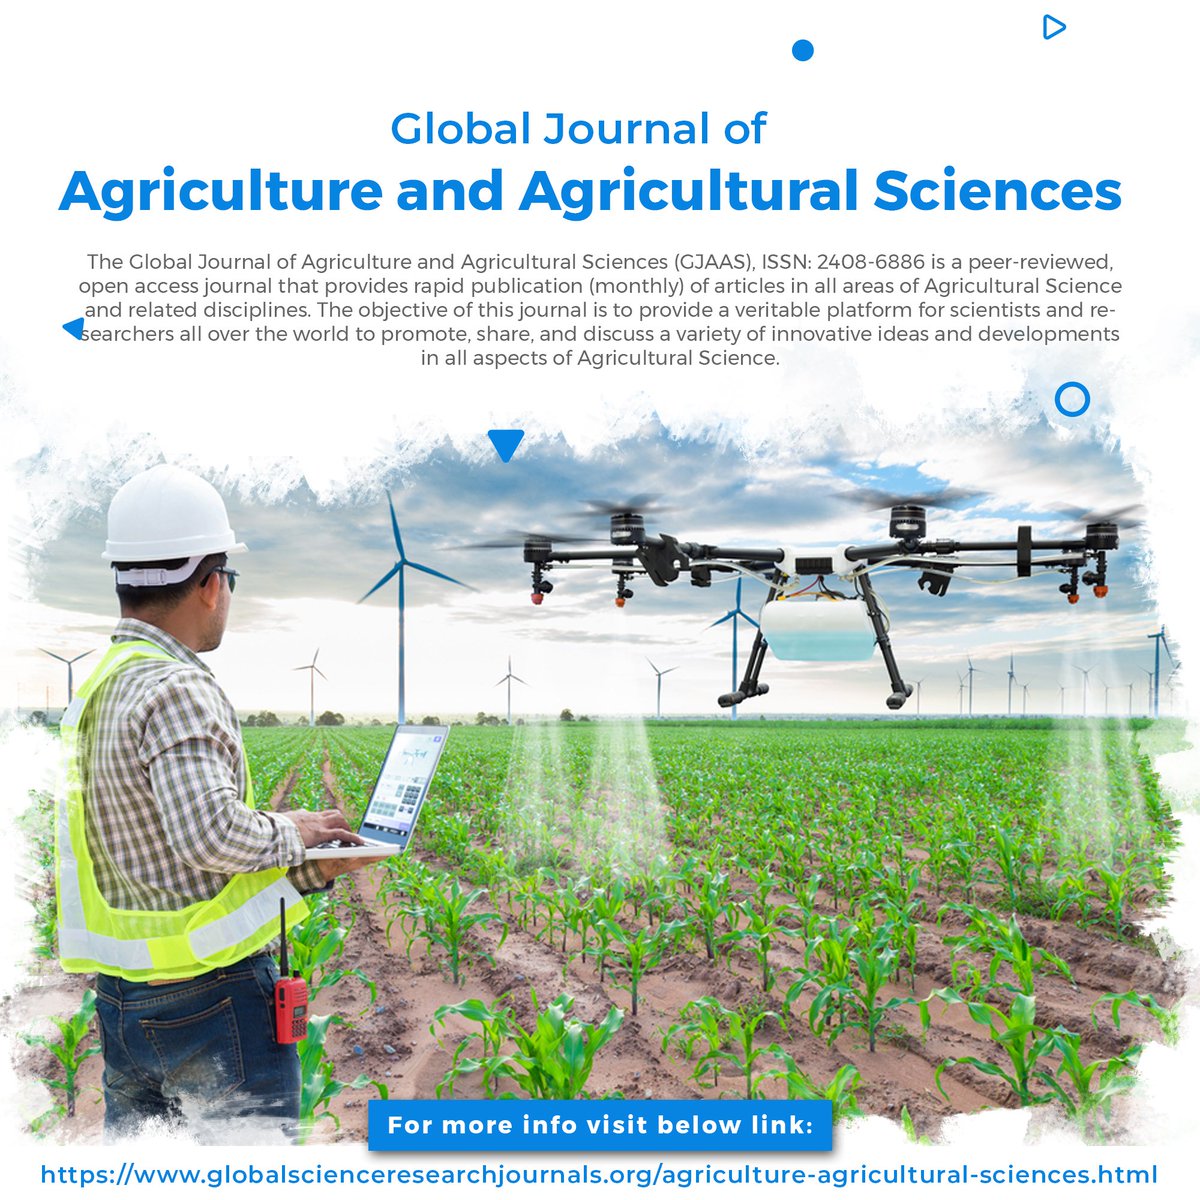 'Exciting news for agri enthusiasts! Just discovered the 'Global Journal of Agriculture and Agricultural Science.'  Looking forward to exploring the latest research and insights in the field.

#AgricultureResearch #oriele #sciencejournal'